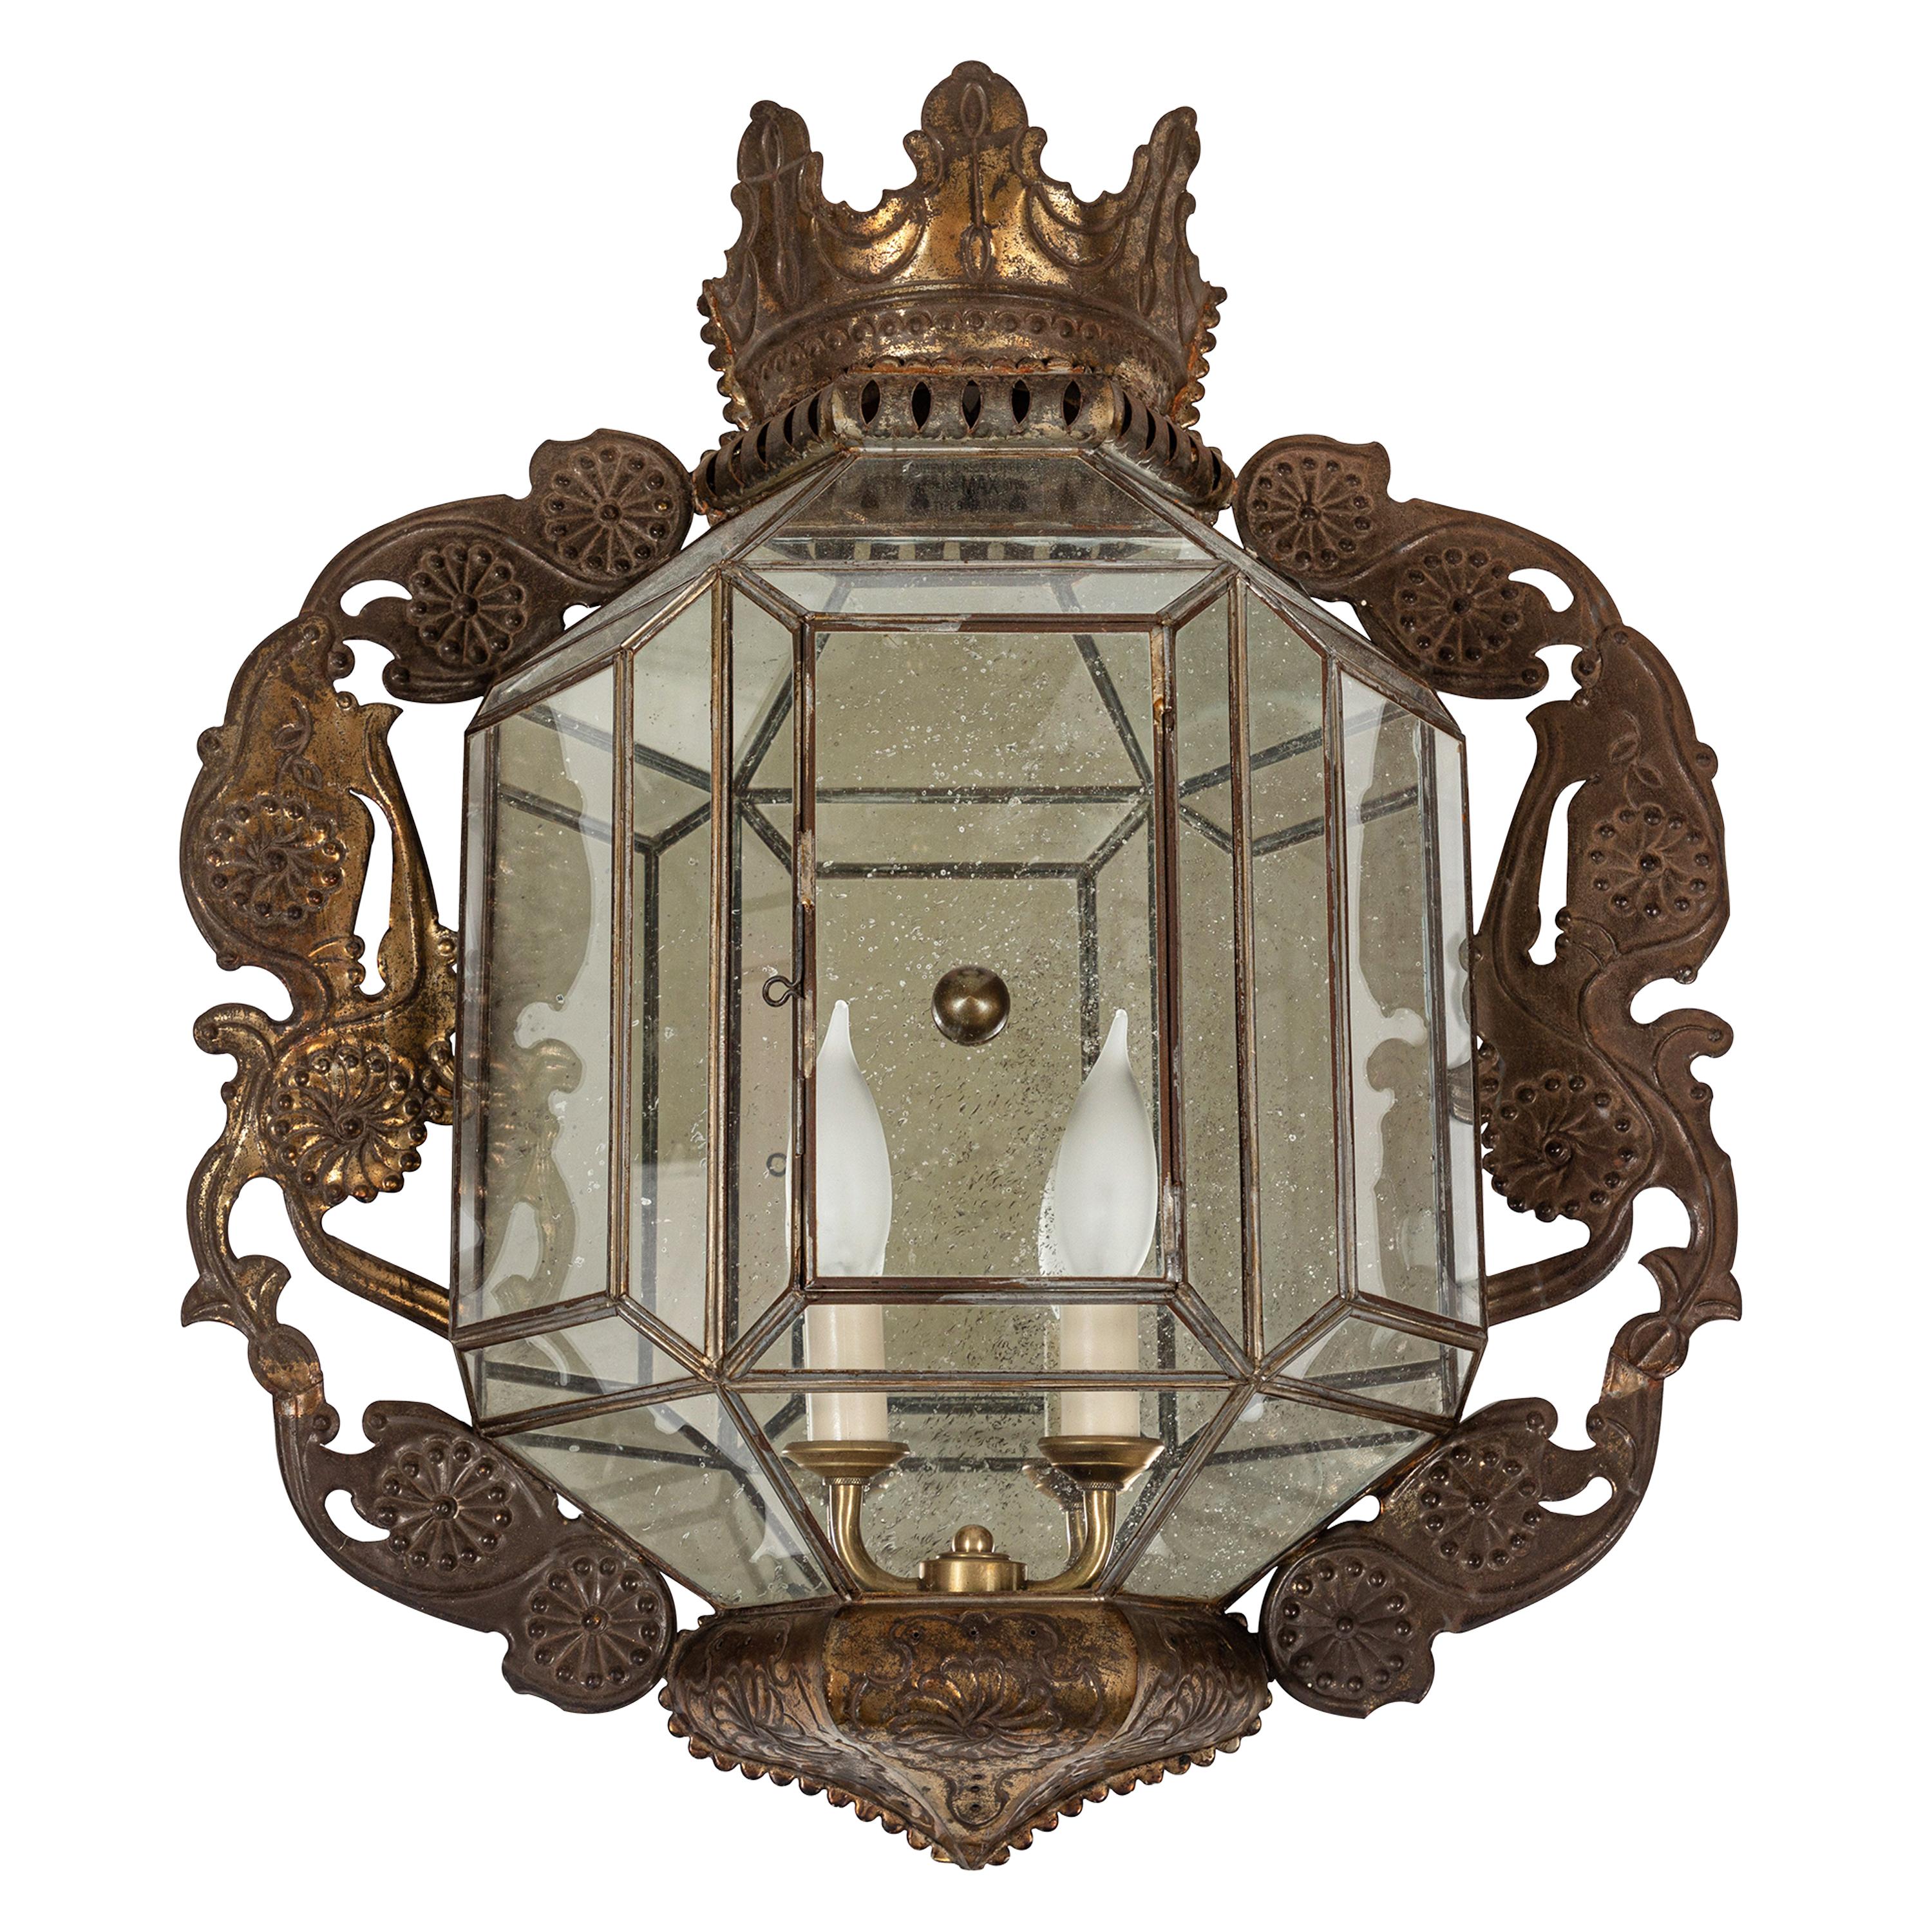 Vintage Wall-Mounted Fixture with Leaded Glass Panels